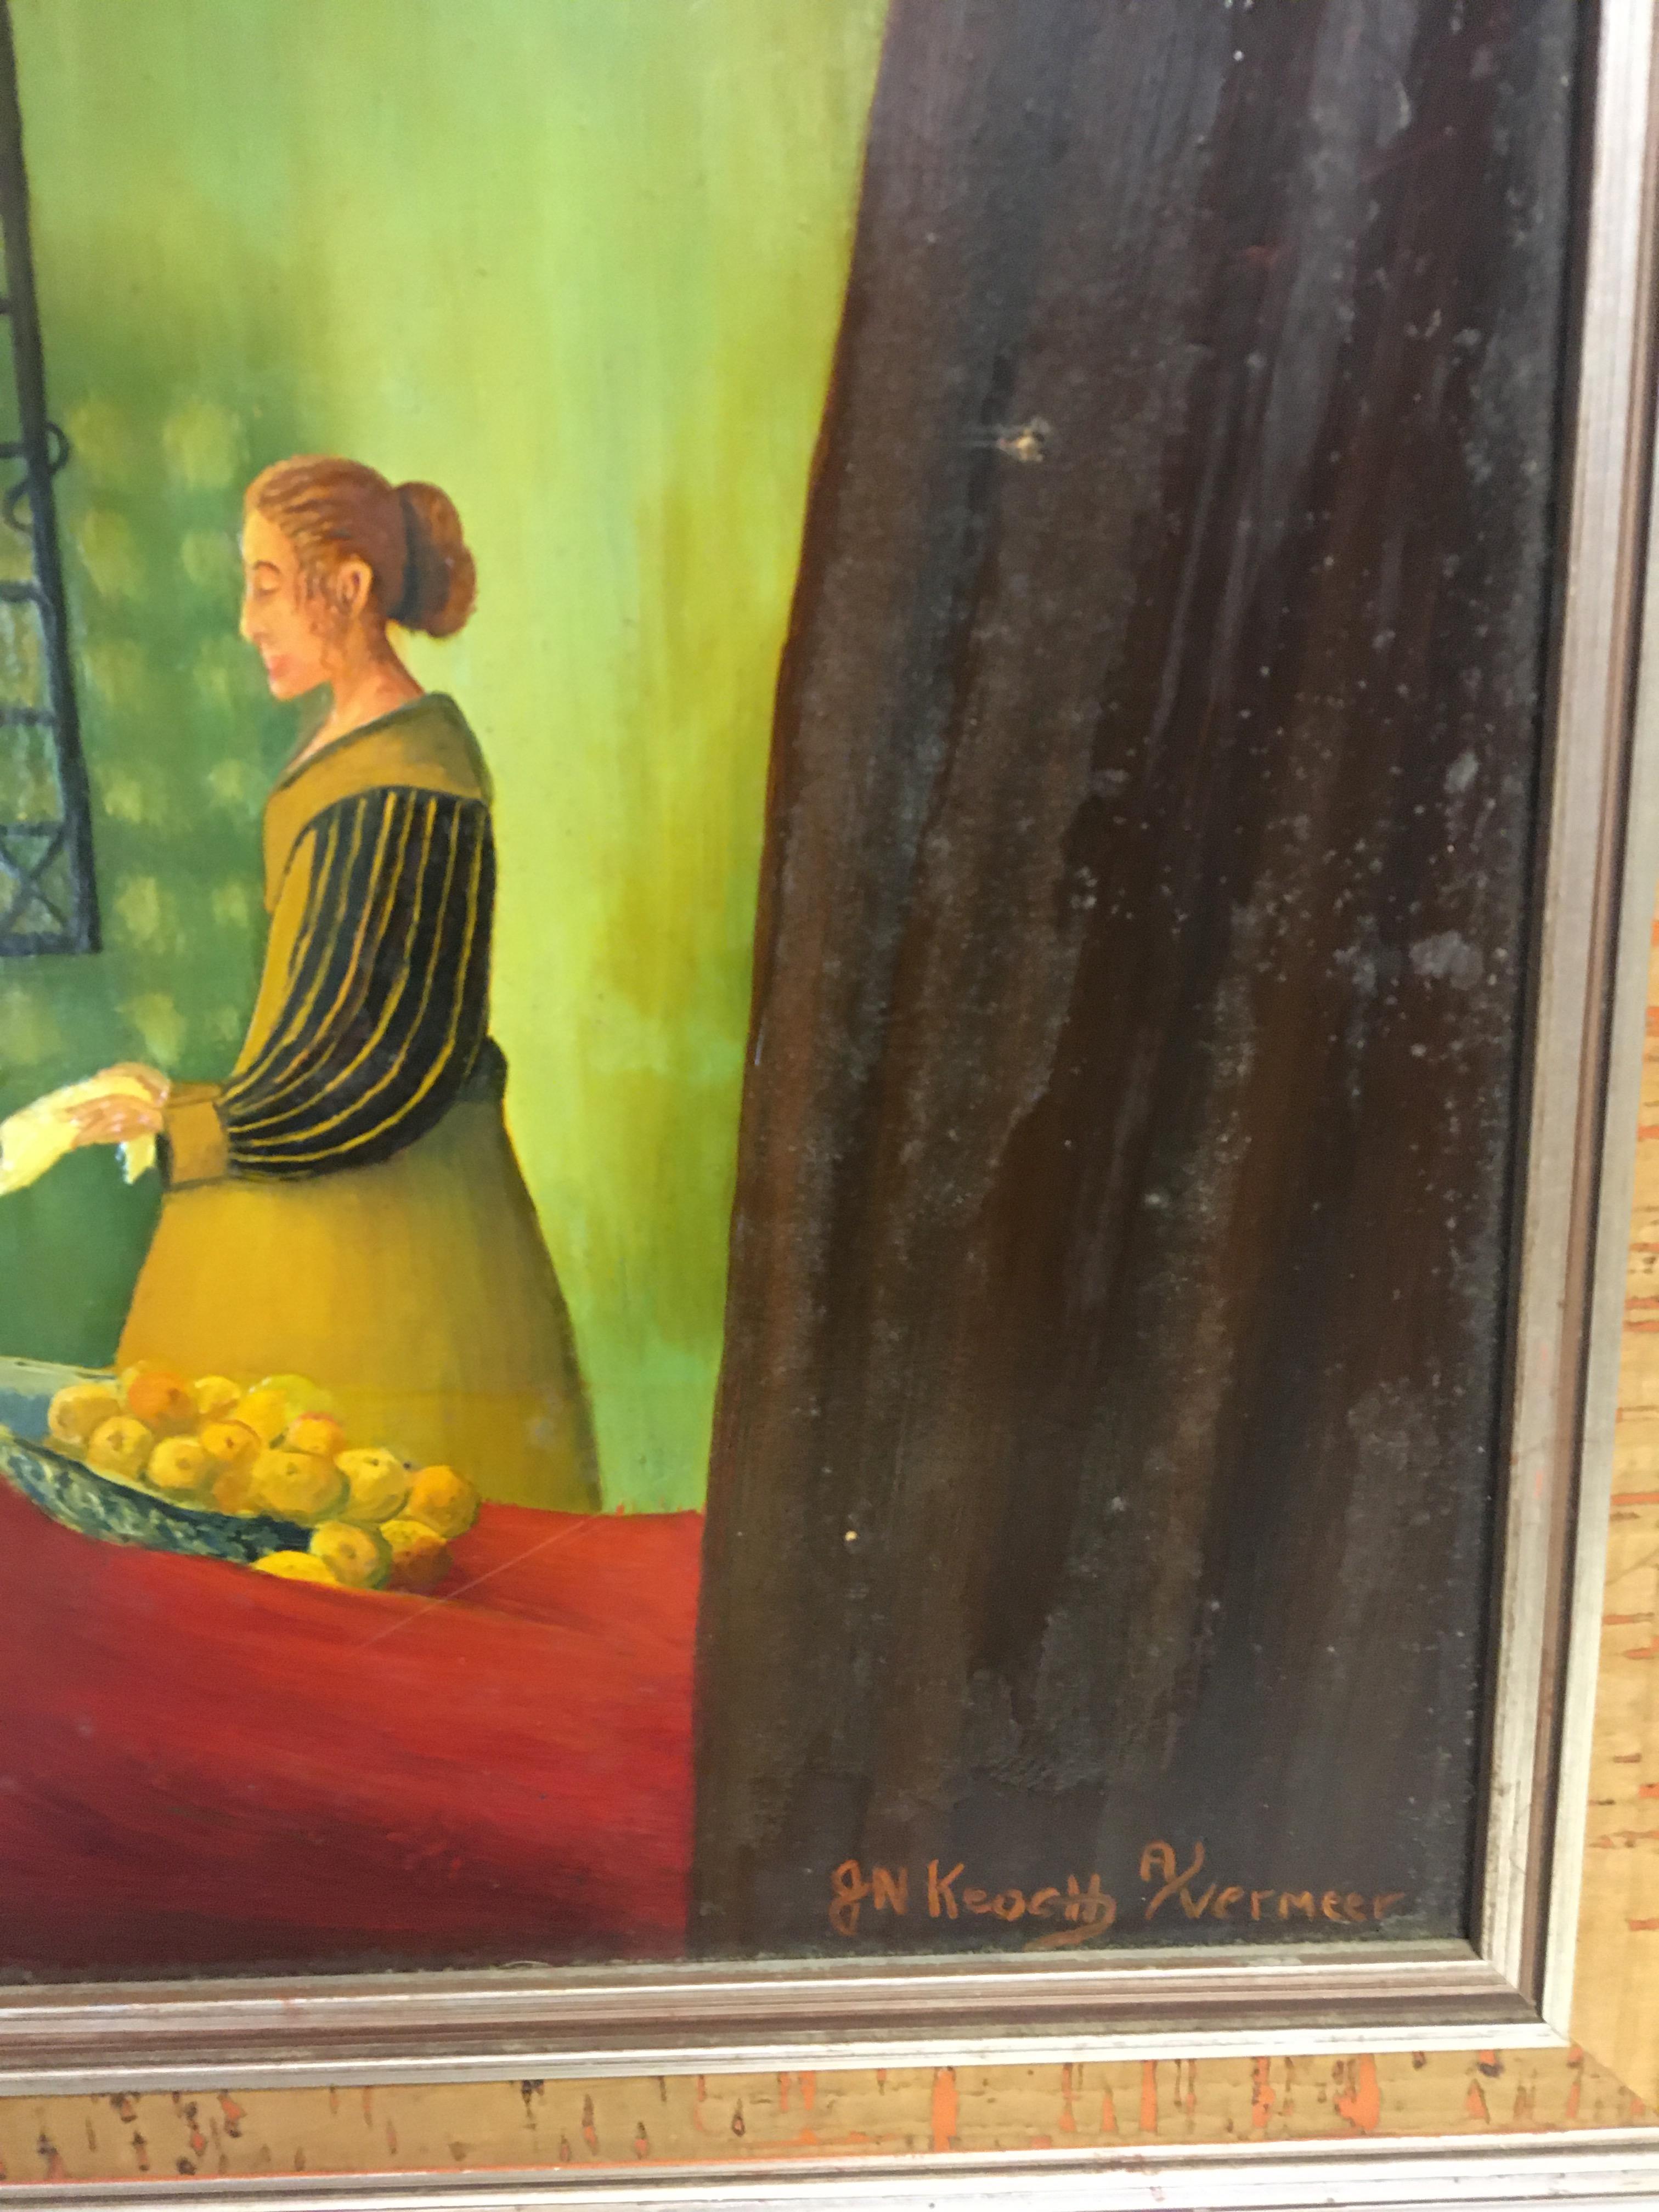 Oil on board painting after Vermeer - Image 2 of 3